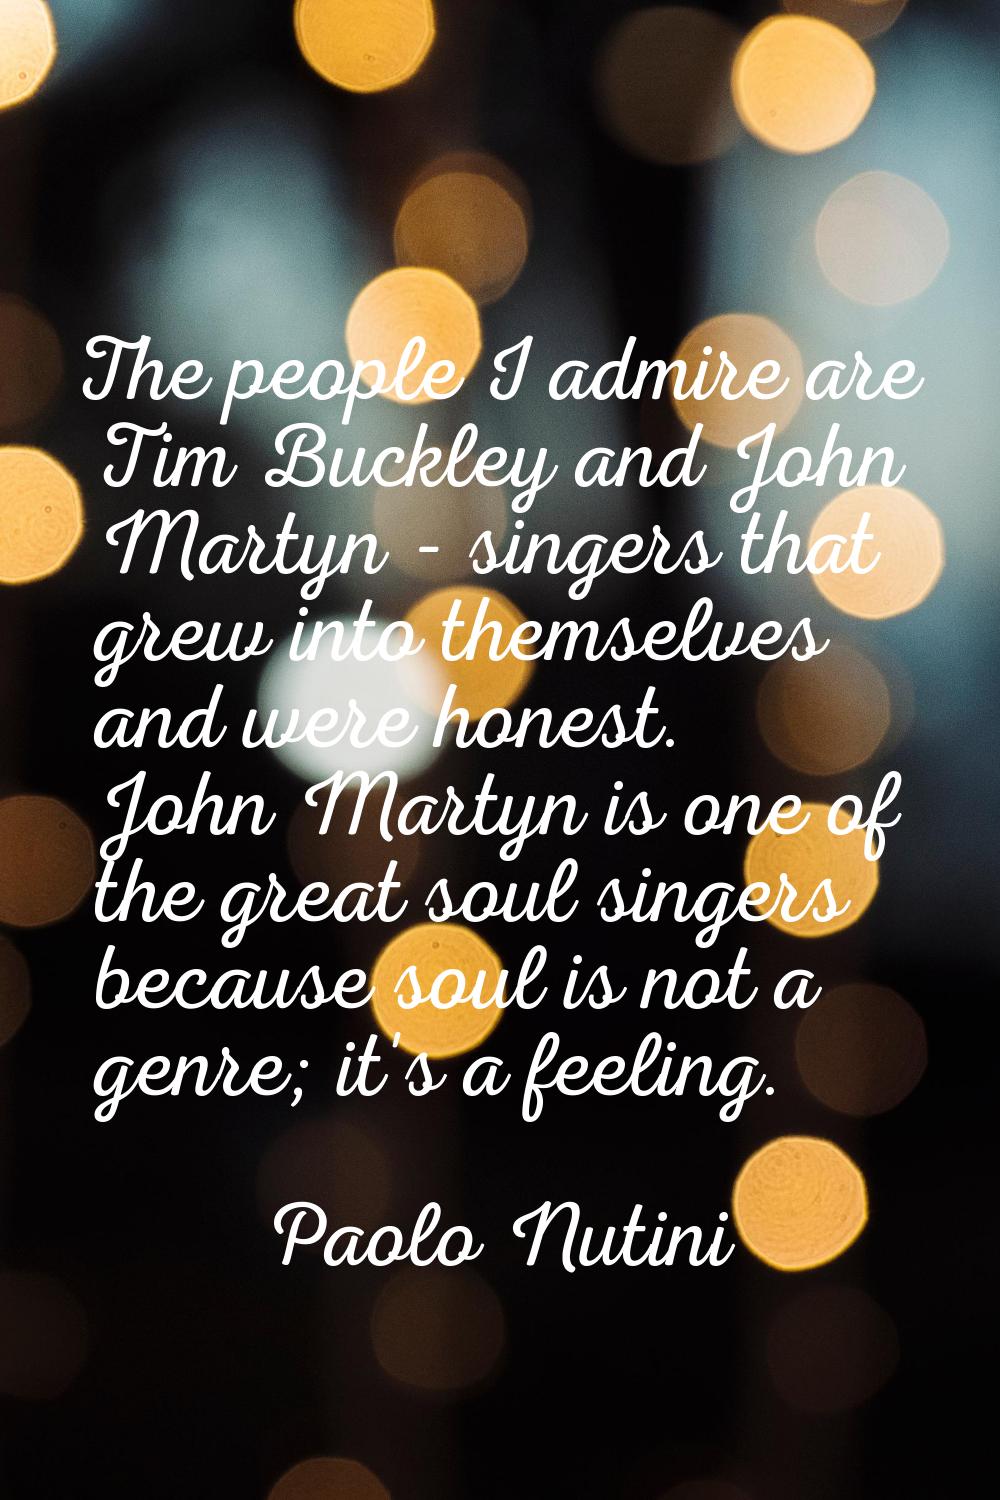 The people I admire are Tim Buckley and John Martyn - singers that grew into themselves and were ho